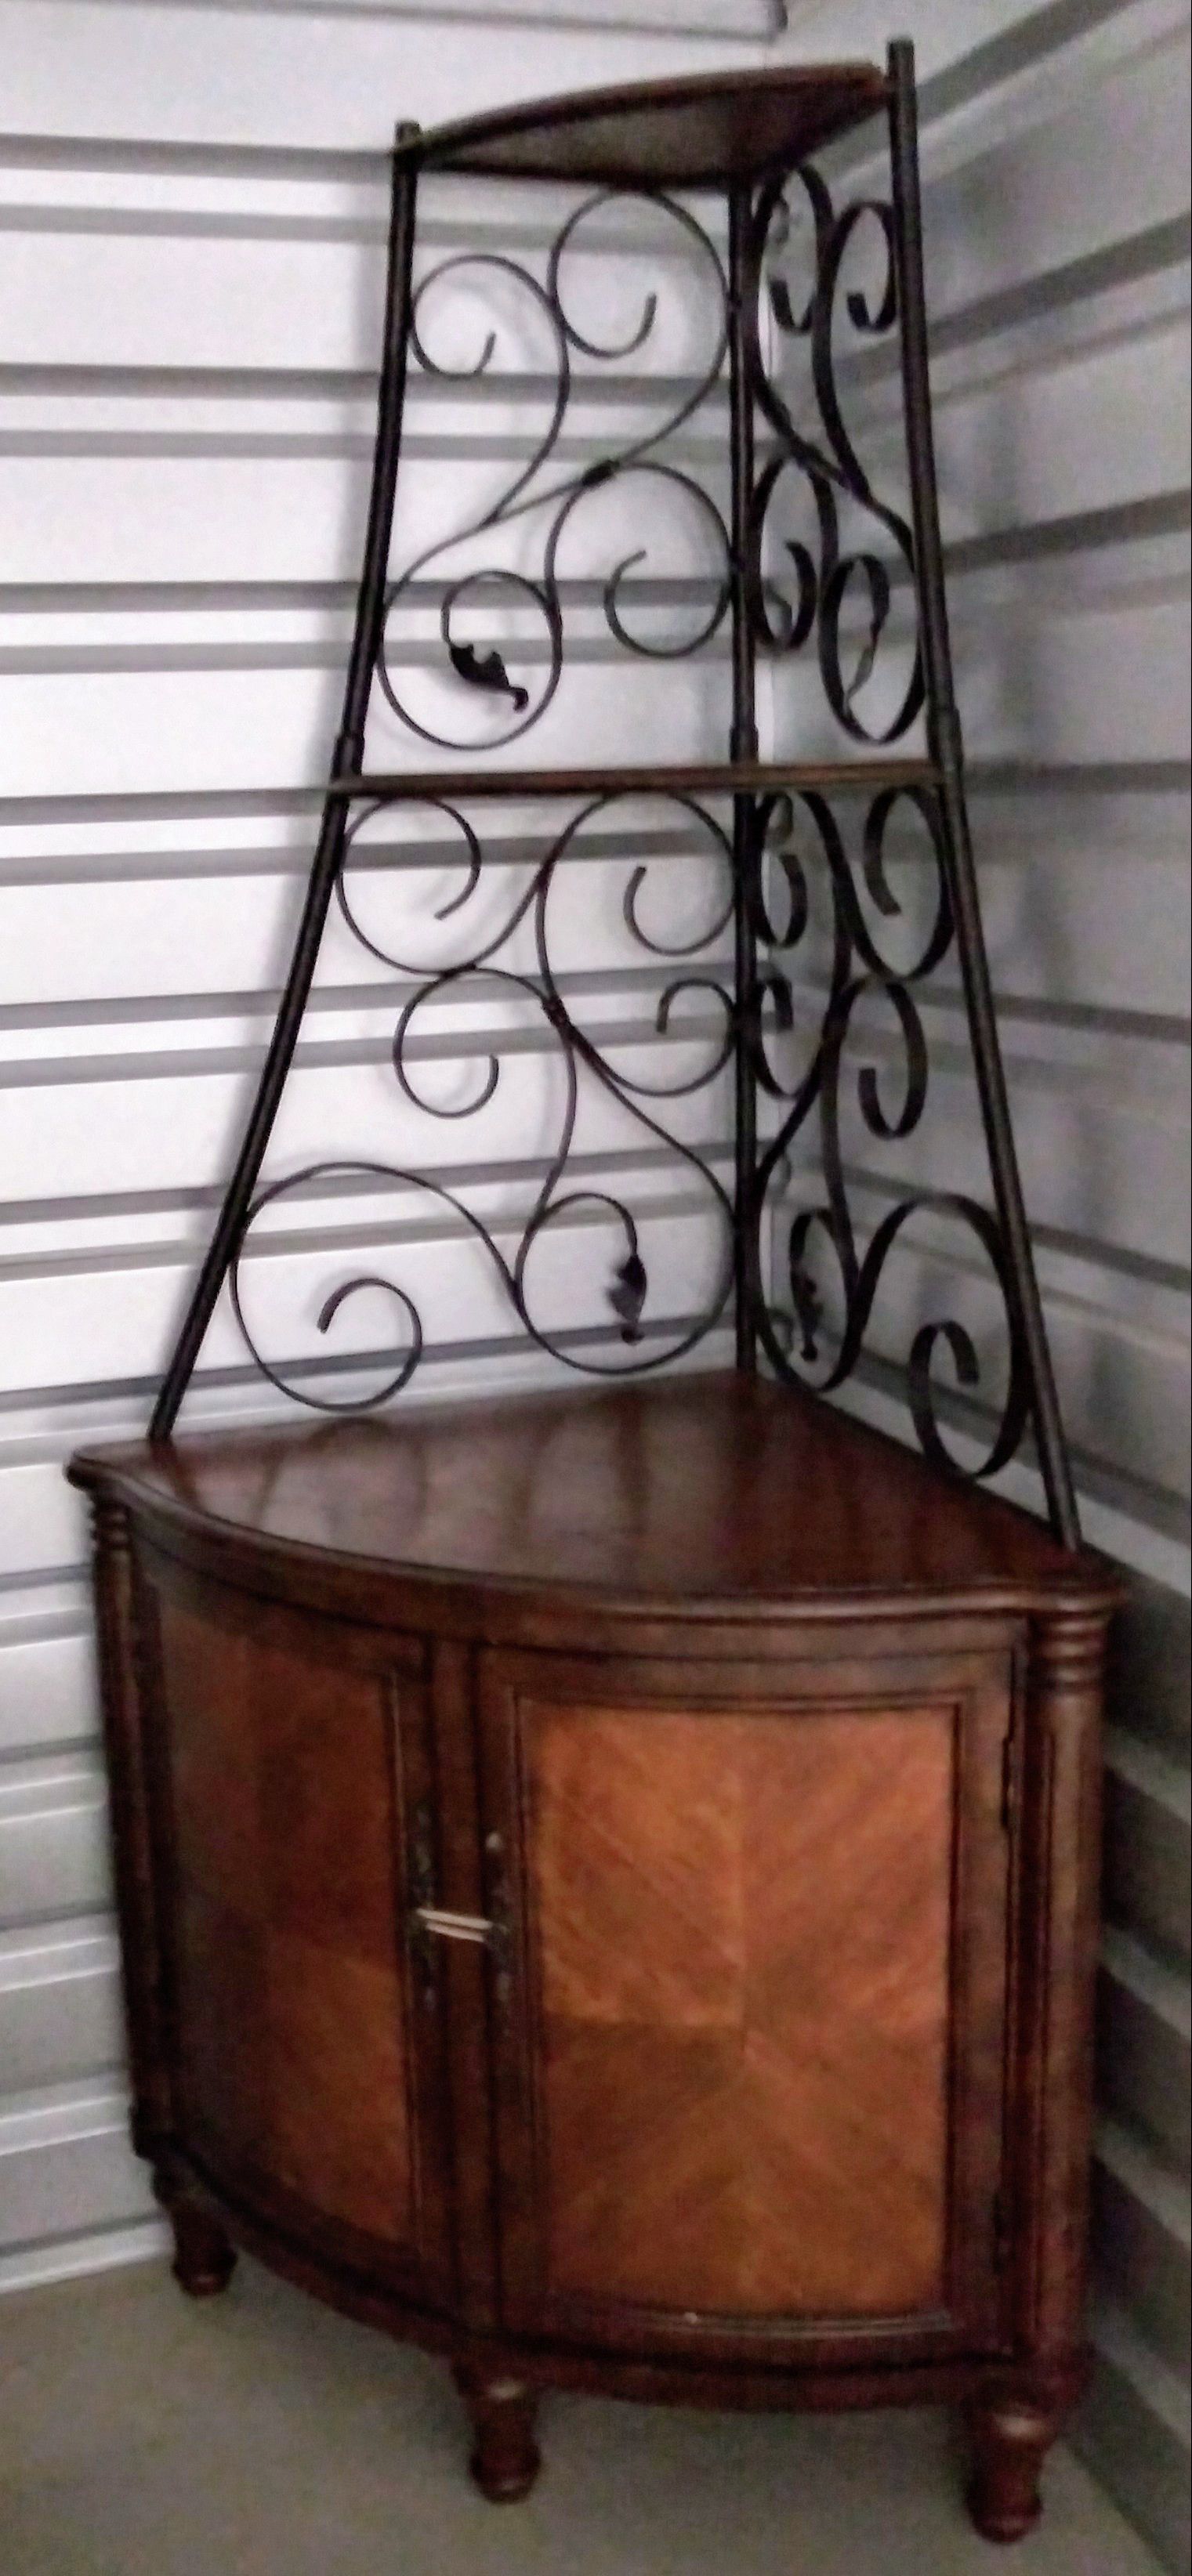 Corner Rack with Wrought Iron Frame and Wood Storage Shelves